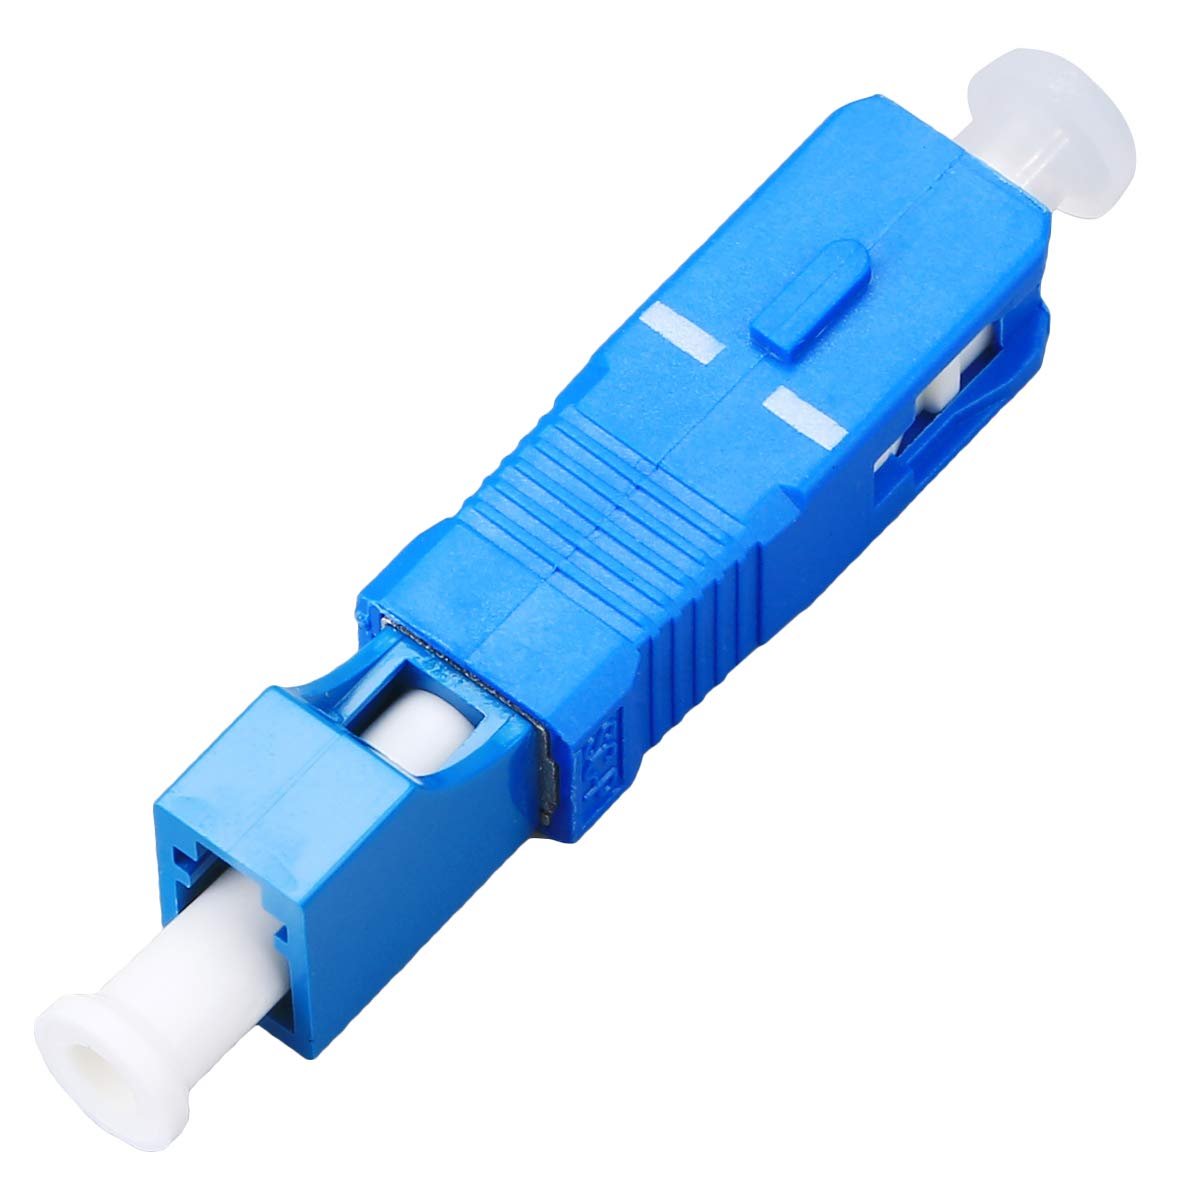 Fiber optic toolM16 sc adapter connector for optical power meter light source MO 